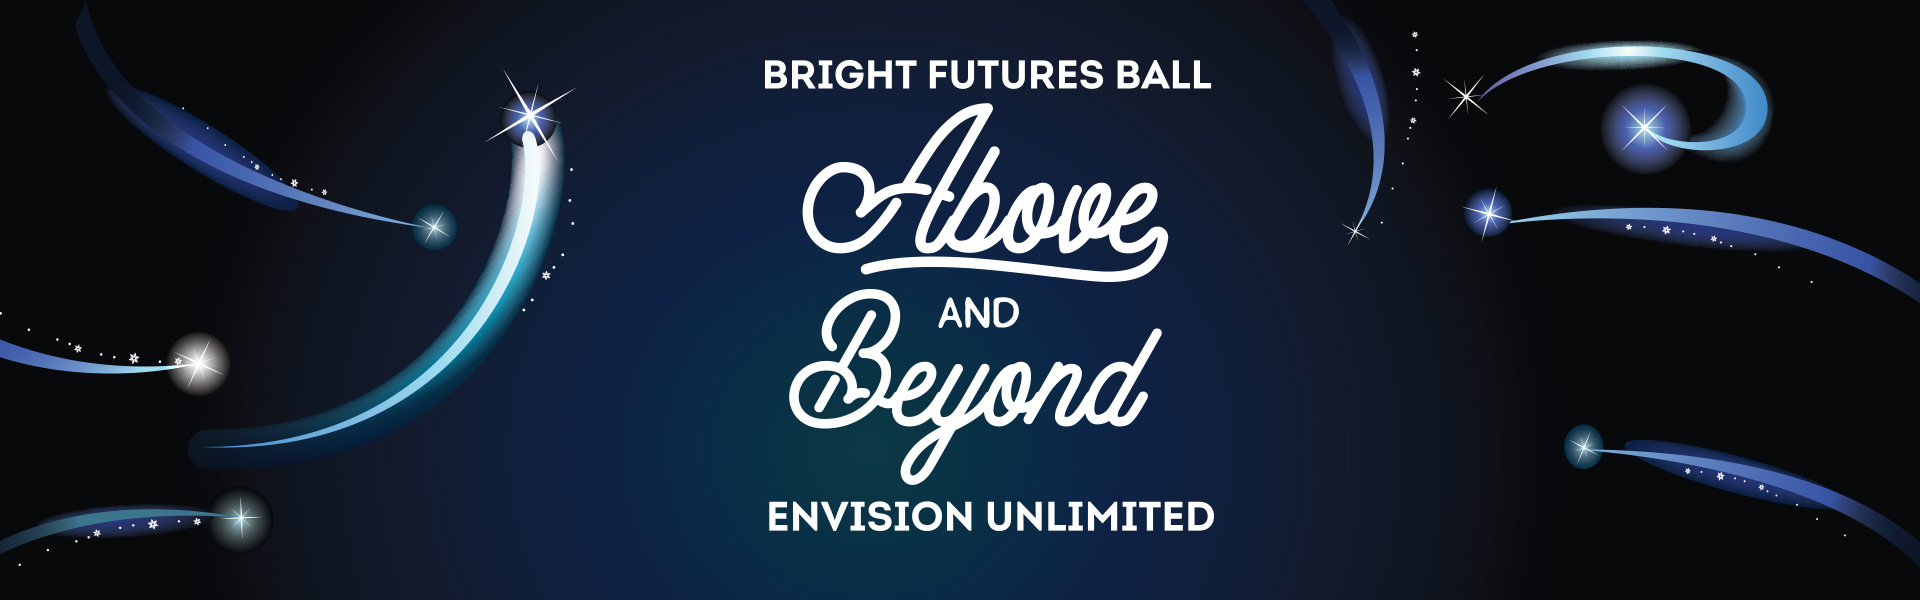 Bright Futures Ball: Above and Beyond